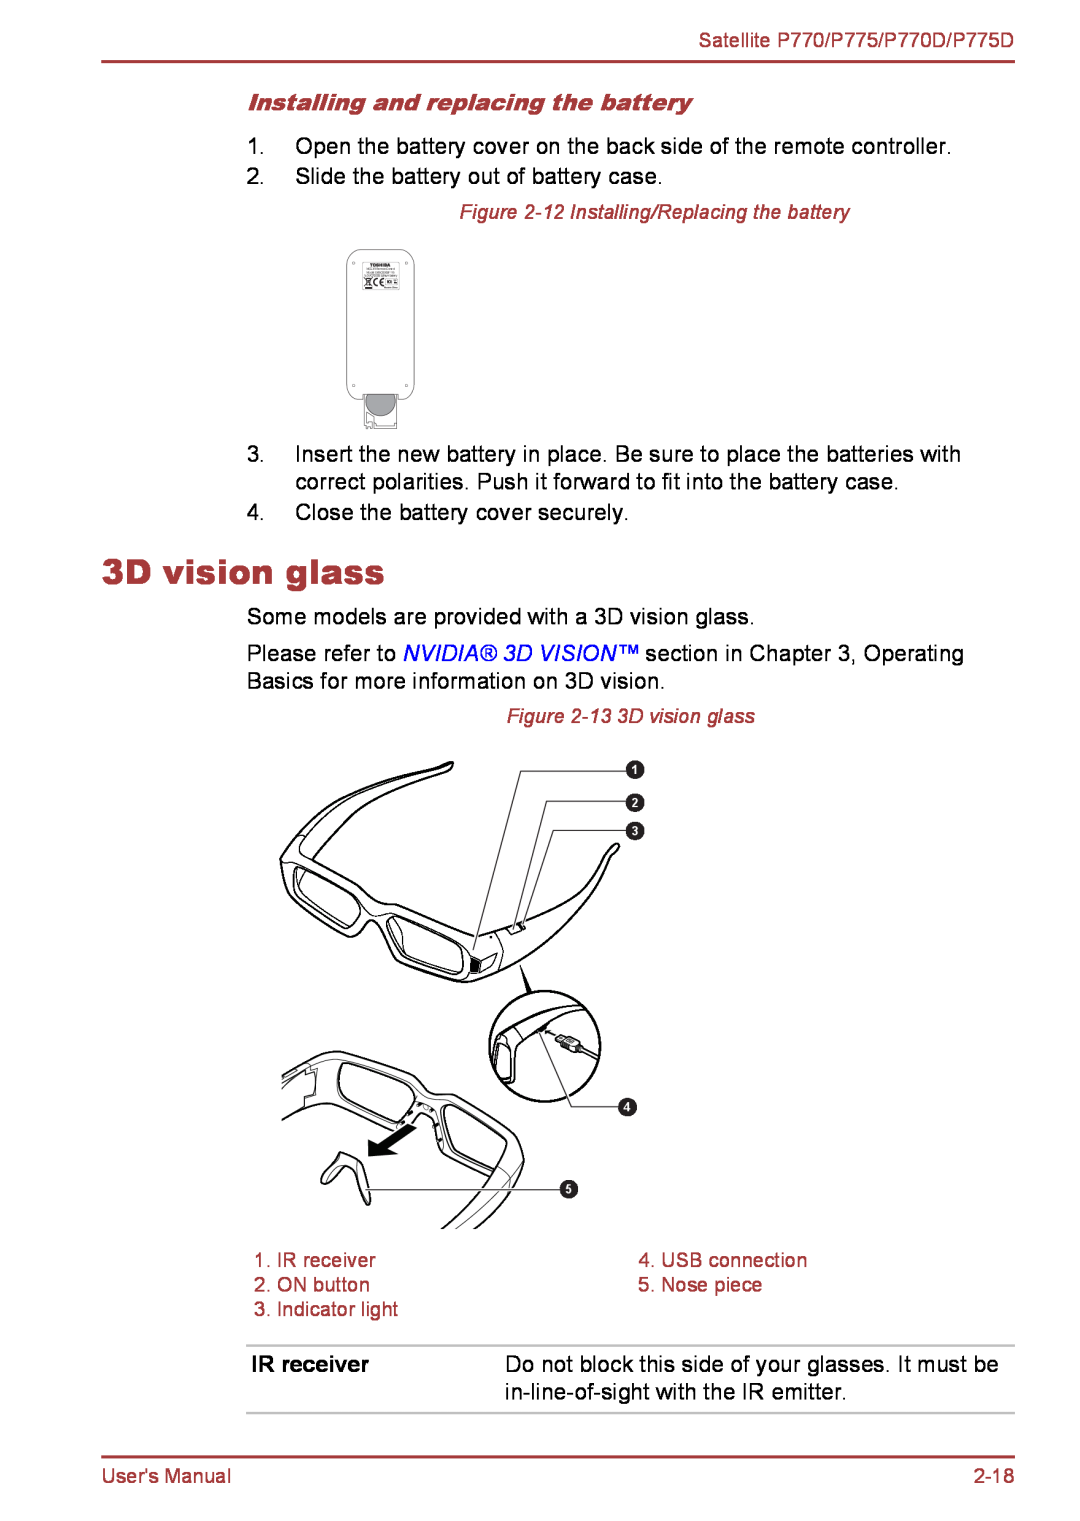 Toshiba P770 3D vision glass, Installing and replacing the battery, IR receiver, in-line-of-sight with the IR emitter 